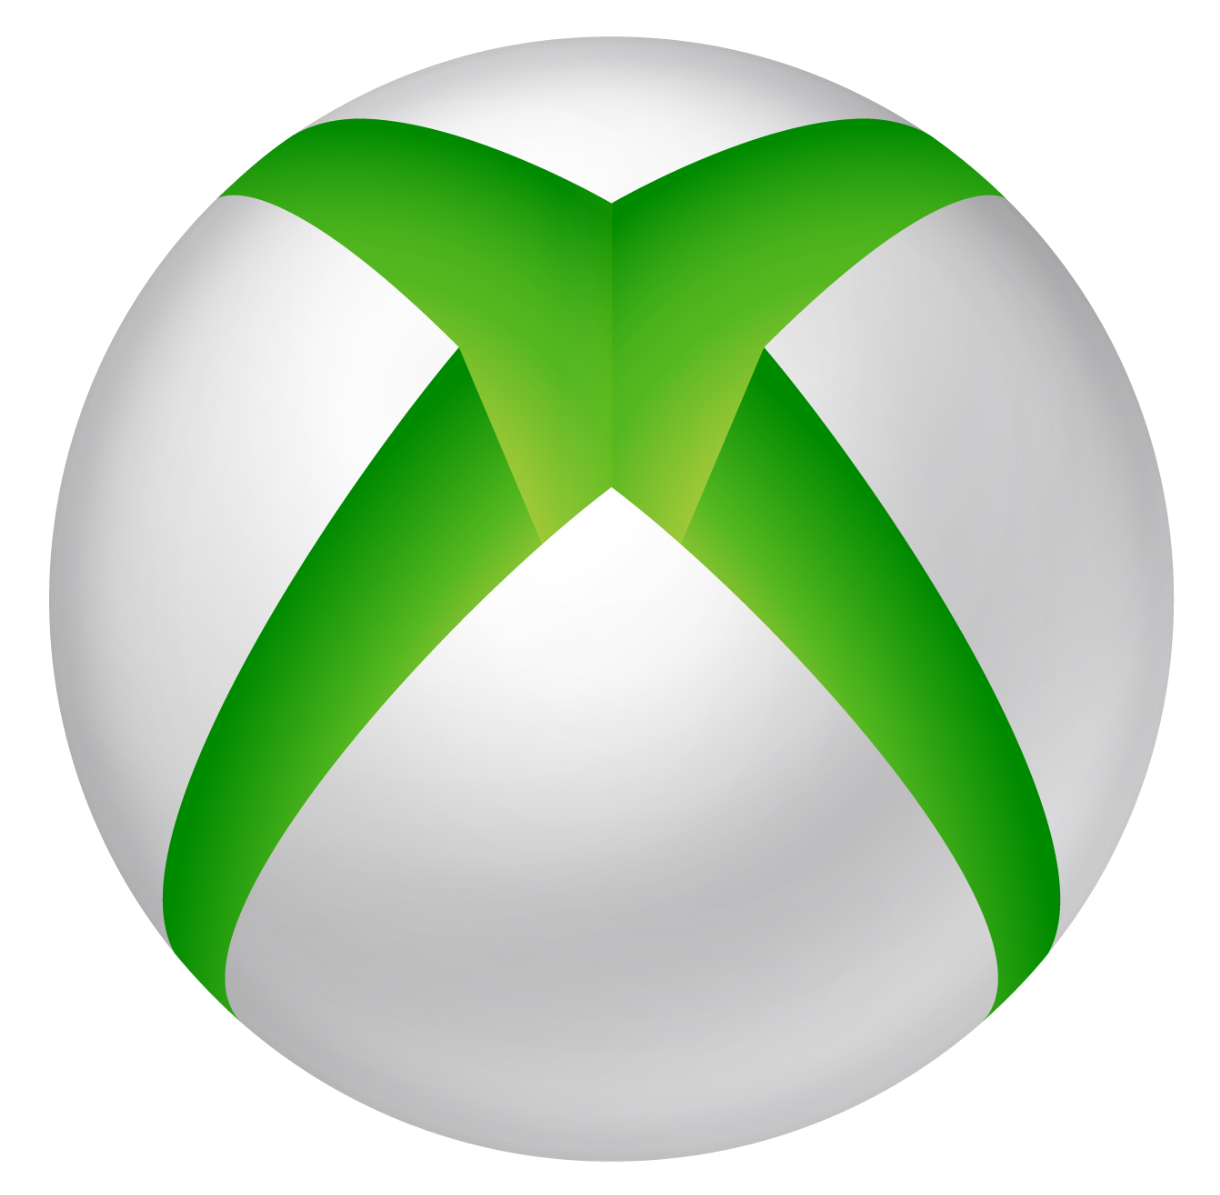 Xbox Logo PNG Image PurePNG Free Transparent CC PNG Image Library